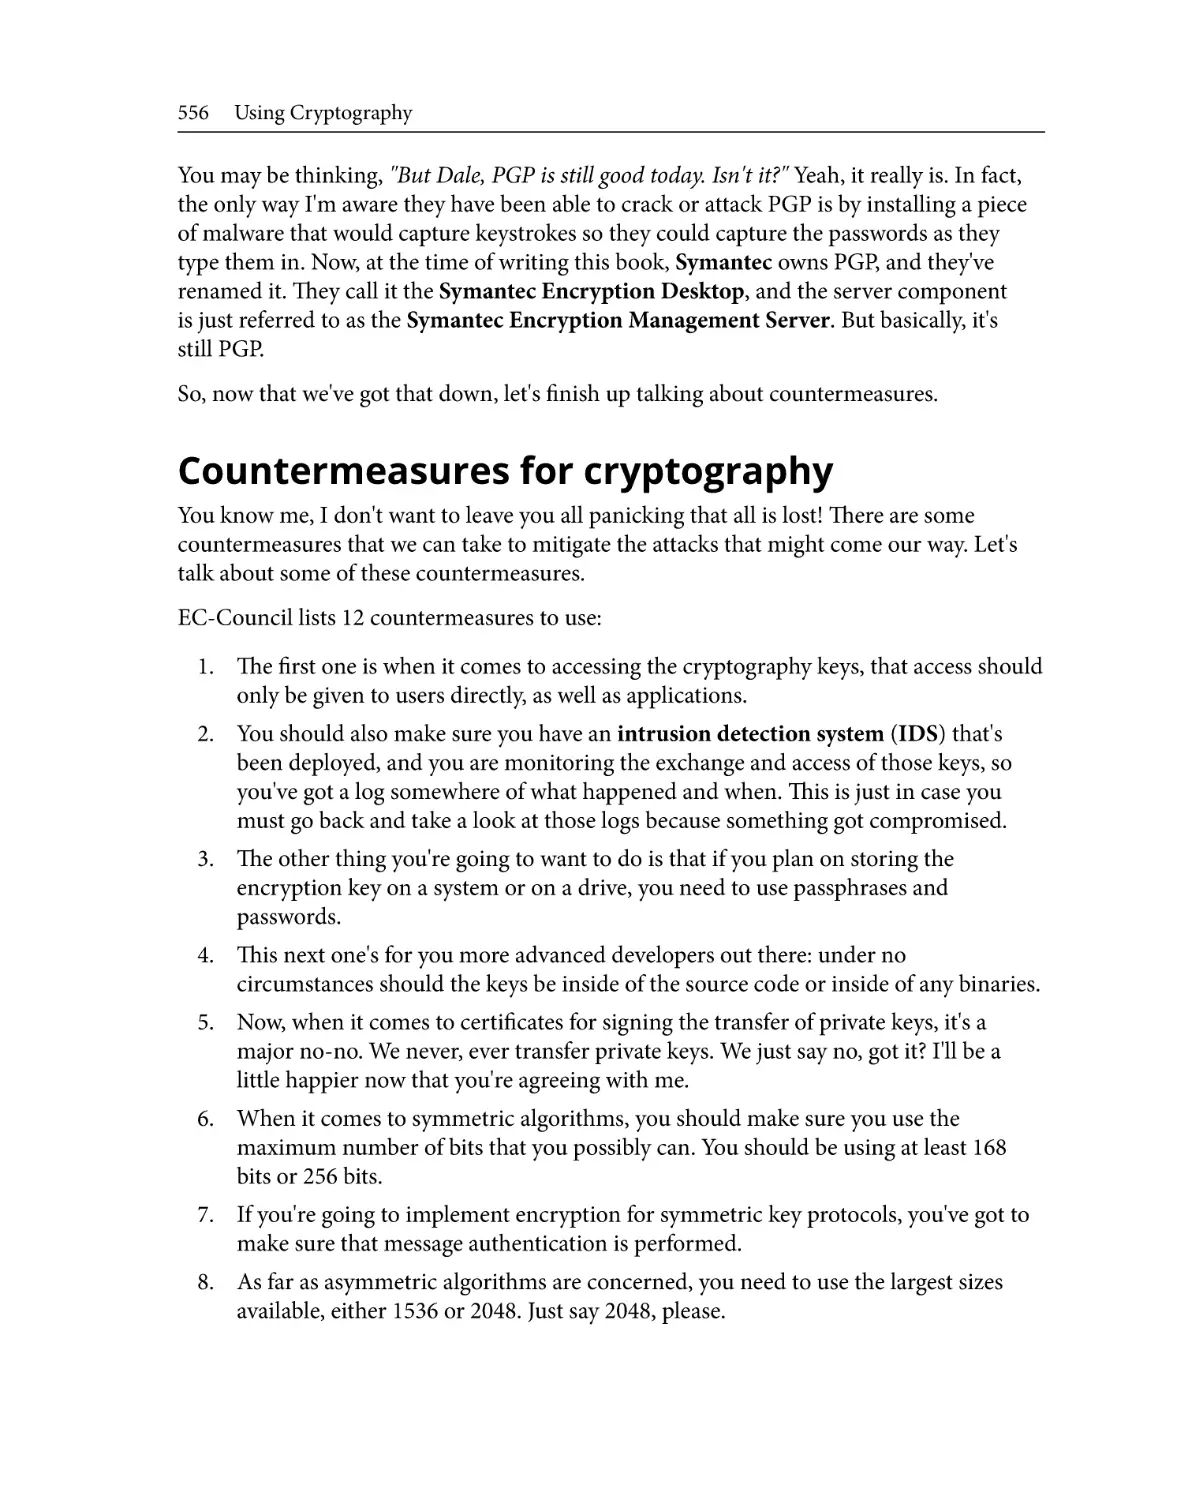 Countermeasures for cryptography